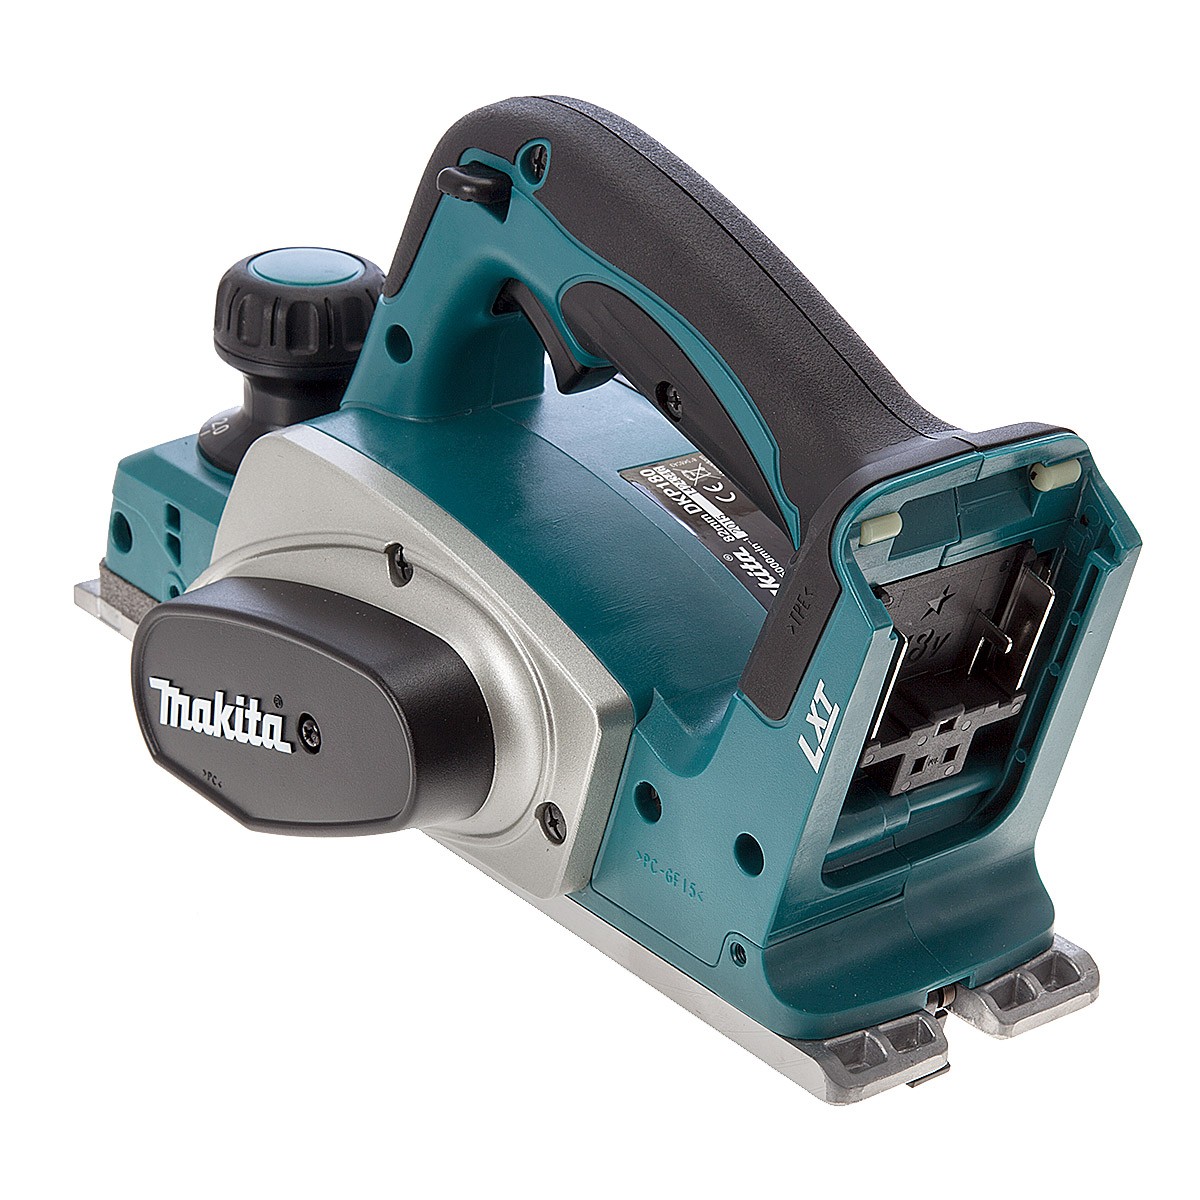 MAKITA DKP180Z 18V LXT CORDLESS PLANER 82MM BODY ONLY - Click Image to Close